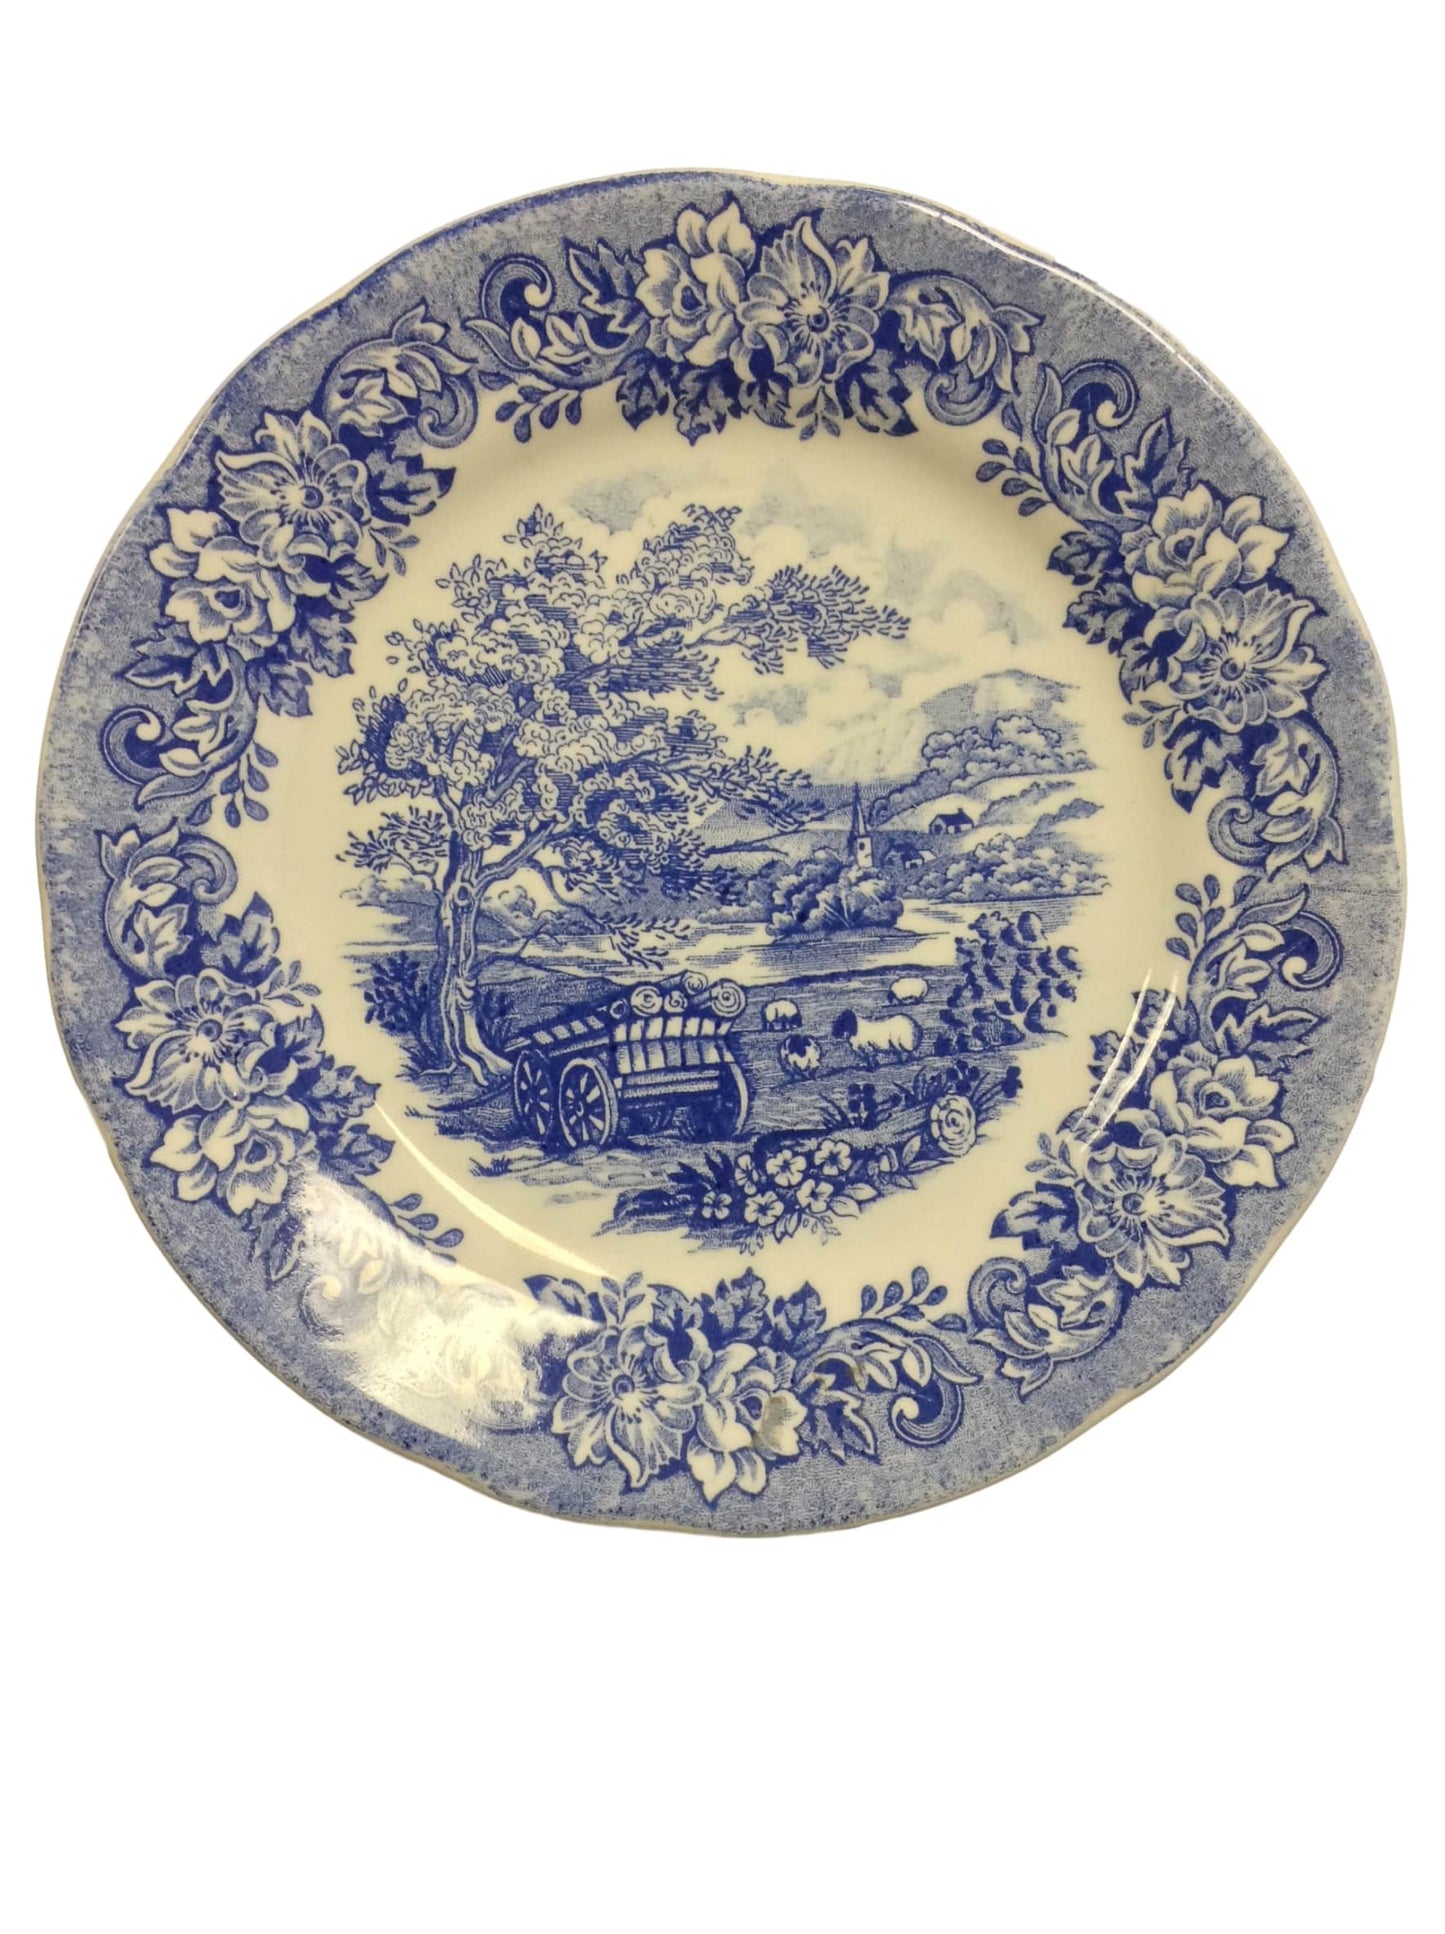 Underglazed Collectable Plate